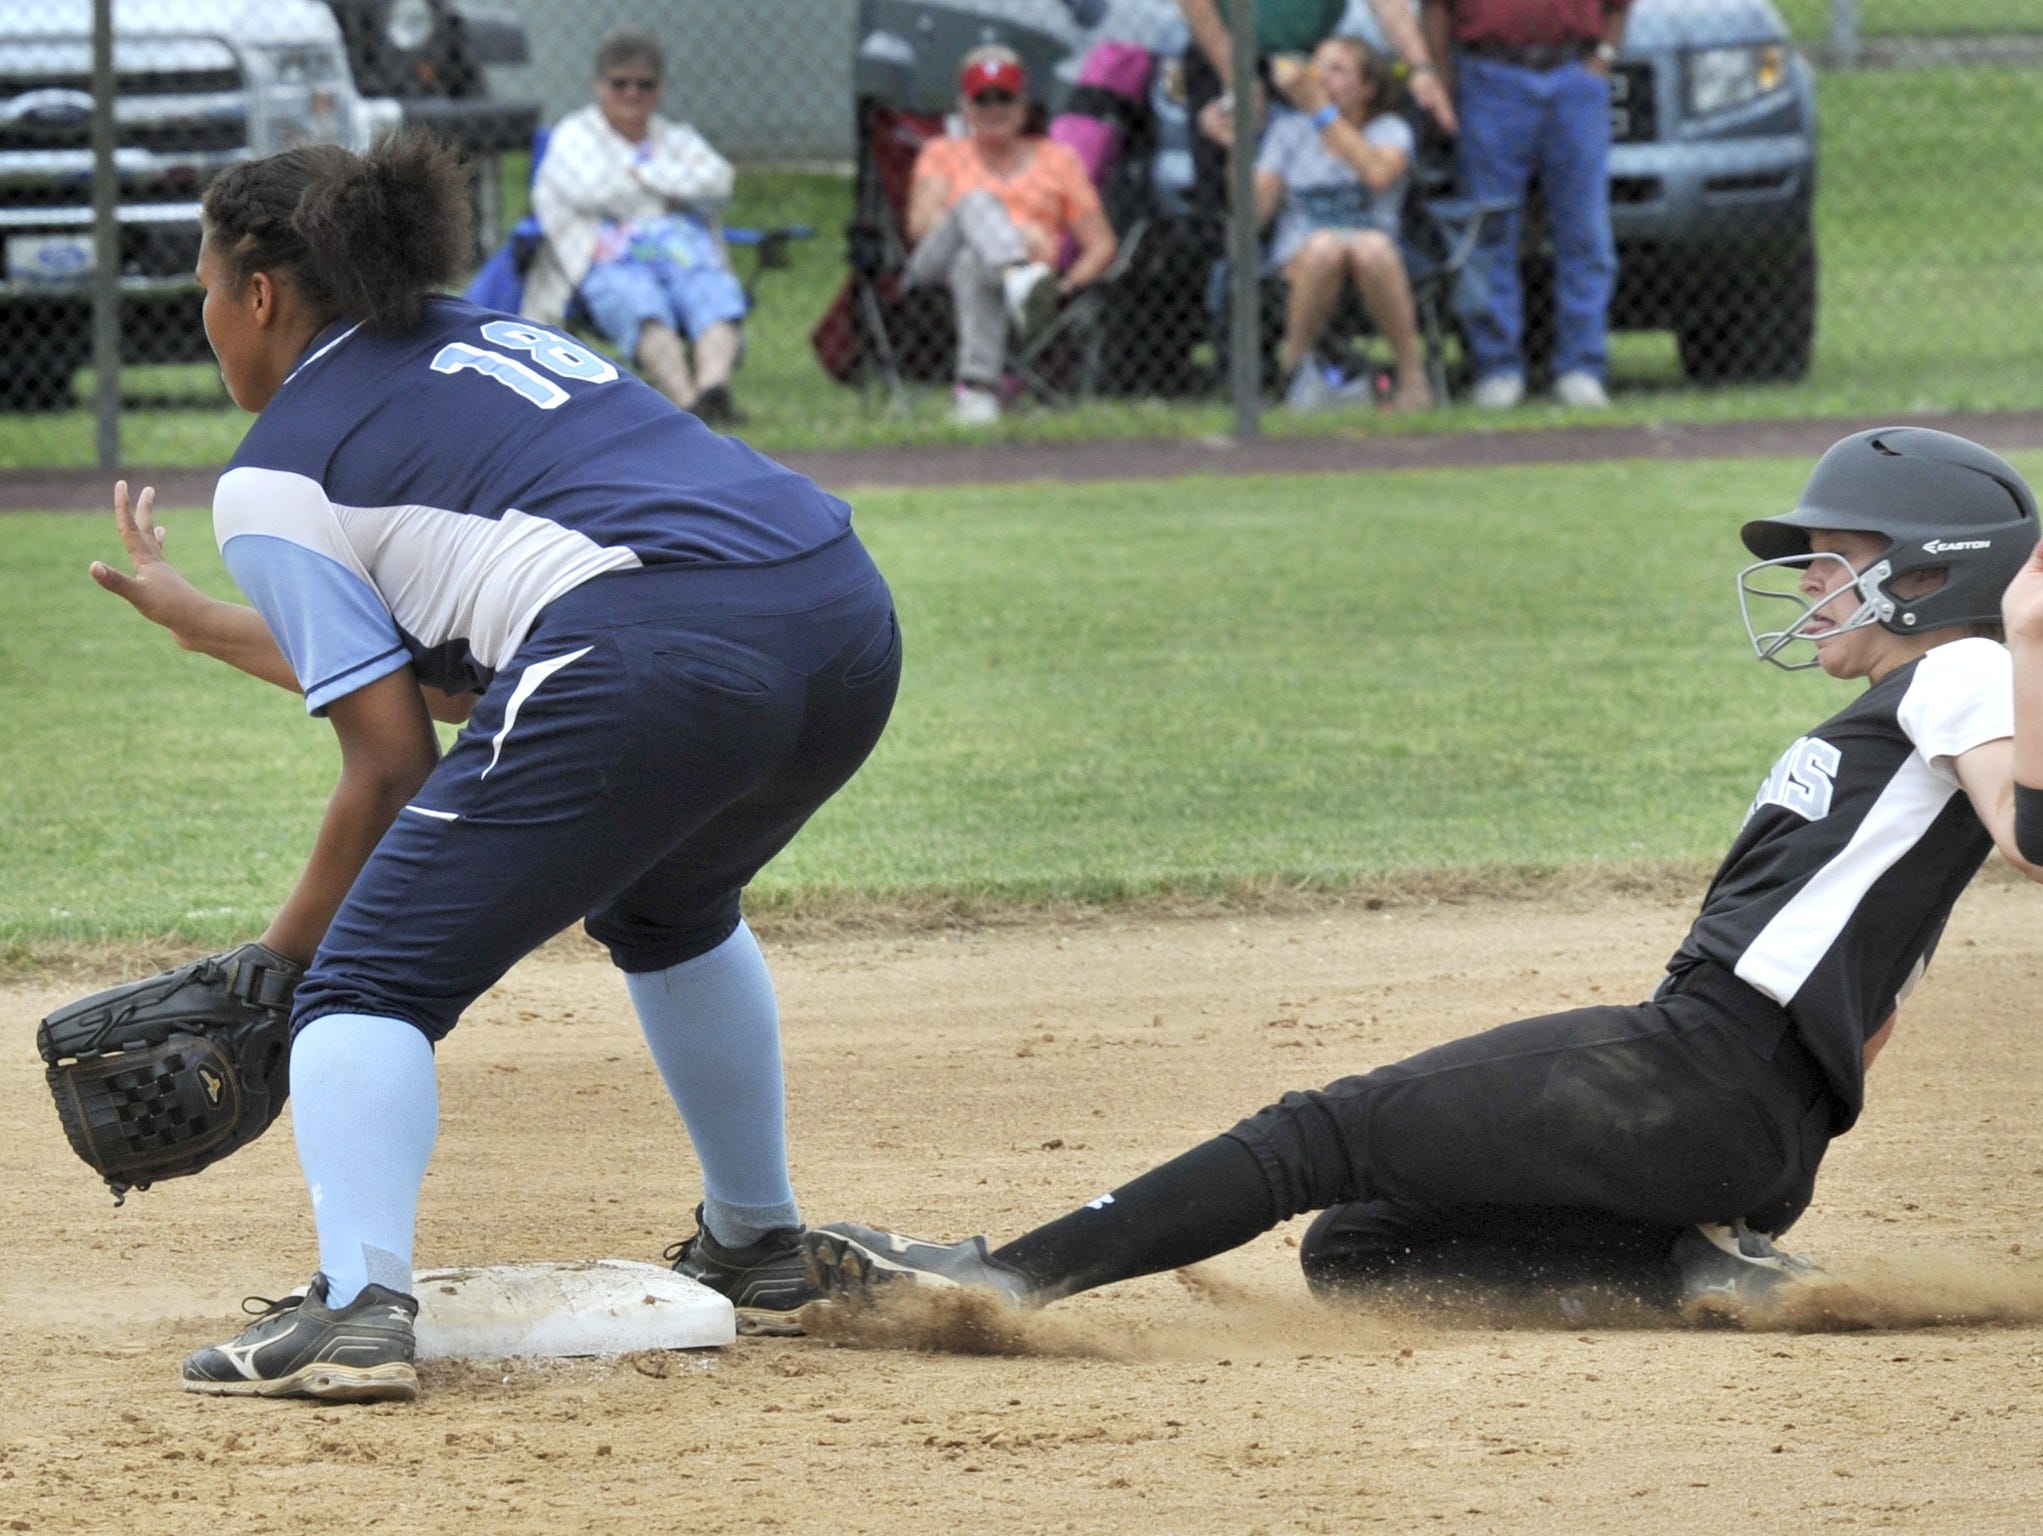 Nicole Hovatter of Sussex Tech slides into 2nd with a double in DIAA playoff game Thursday. Kayla Thompson of the Spartans takes the throw from the outfield.